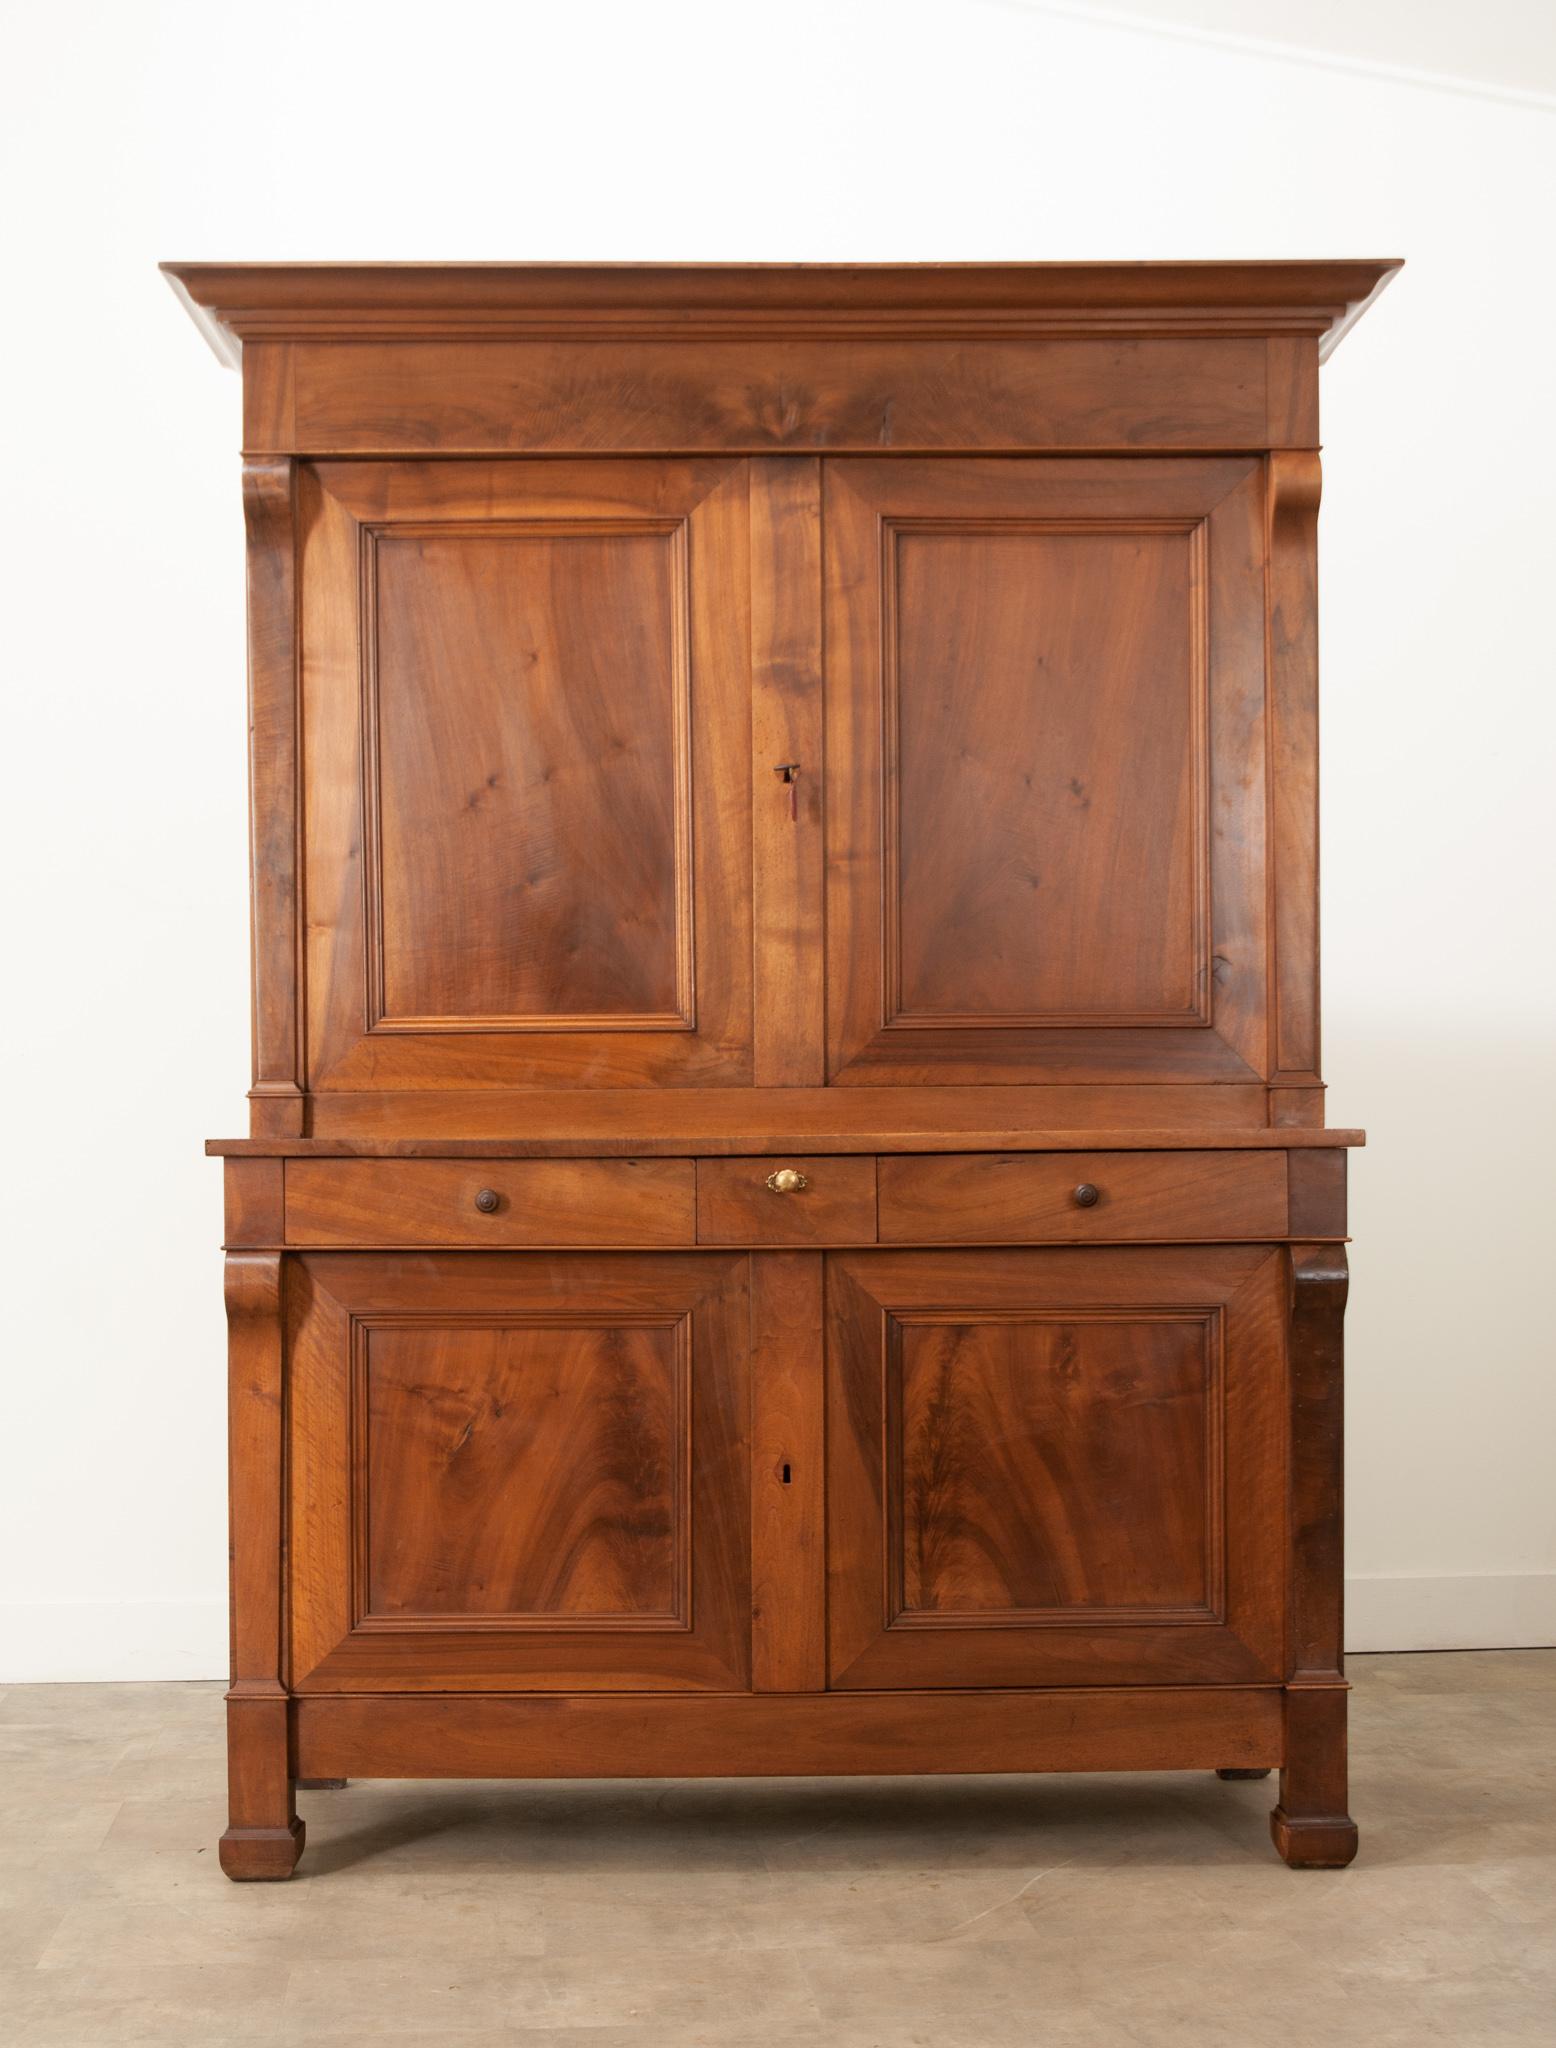 A gorgeous solid walnut buffet a deux corps, hand-crafted in the Restauration style, in 1870s France. The buffet is composed of two bodies: an upper and lower. The upper body is outfitted with two fixed shelves inside that measure 14 ¾” deep. The